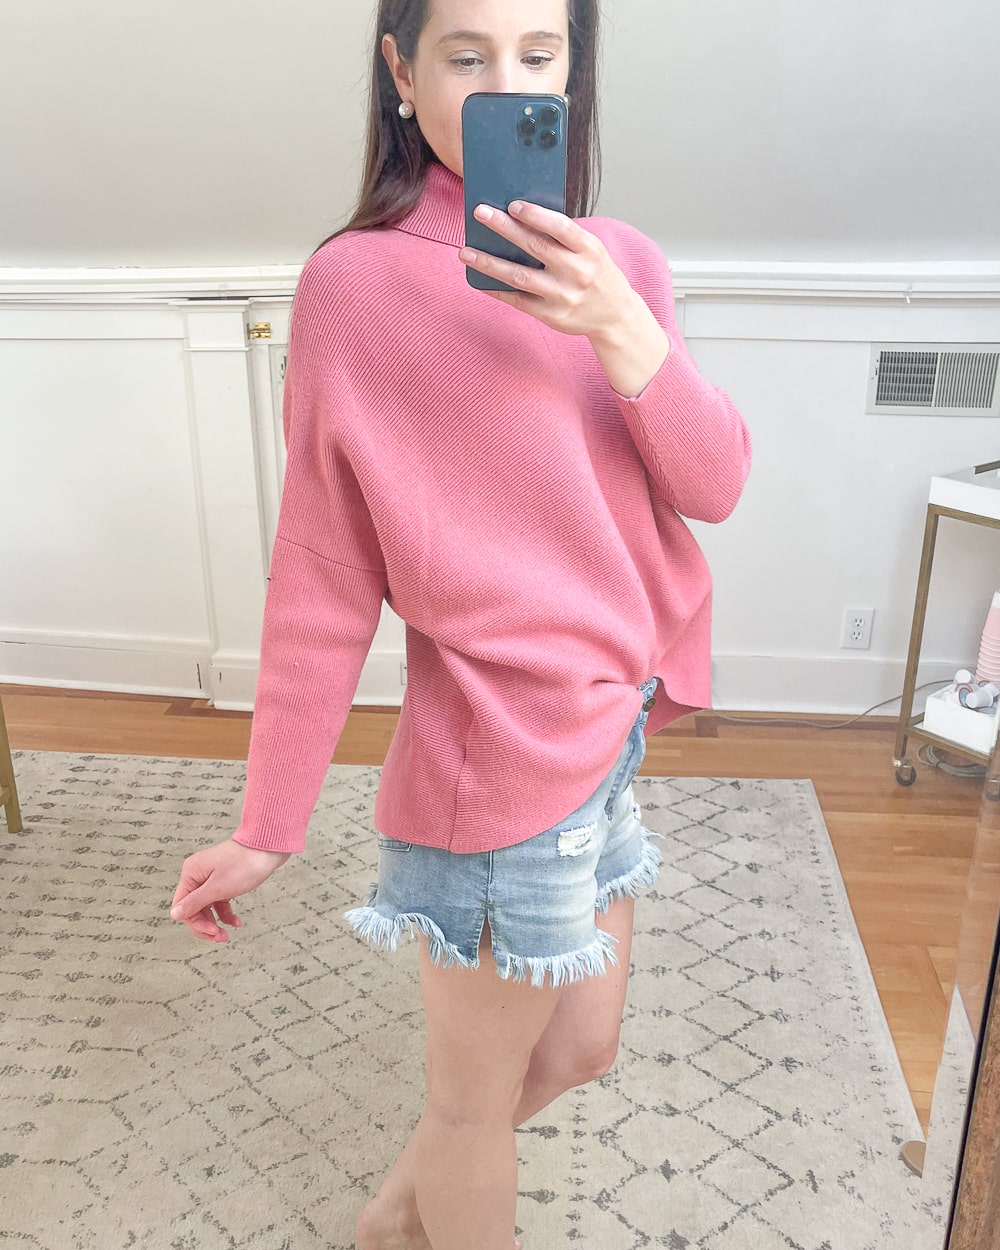 Affordable fashion blogger Stephanie Ziajka shares a close-up of her rubber pink Amazon long batwing sleeve asymmetrical hem pullover sweater on Diary of a Debutante